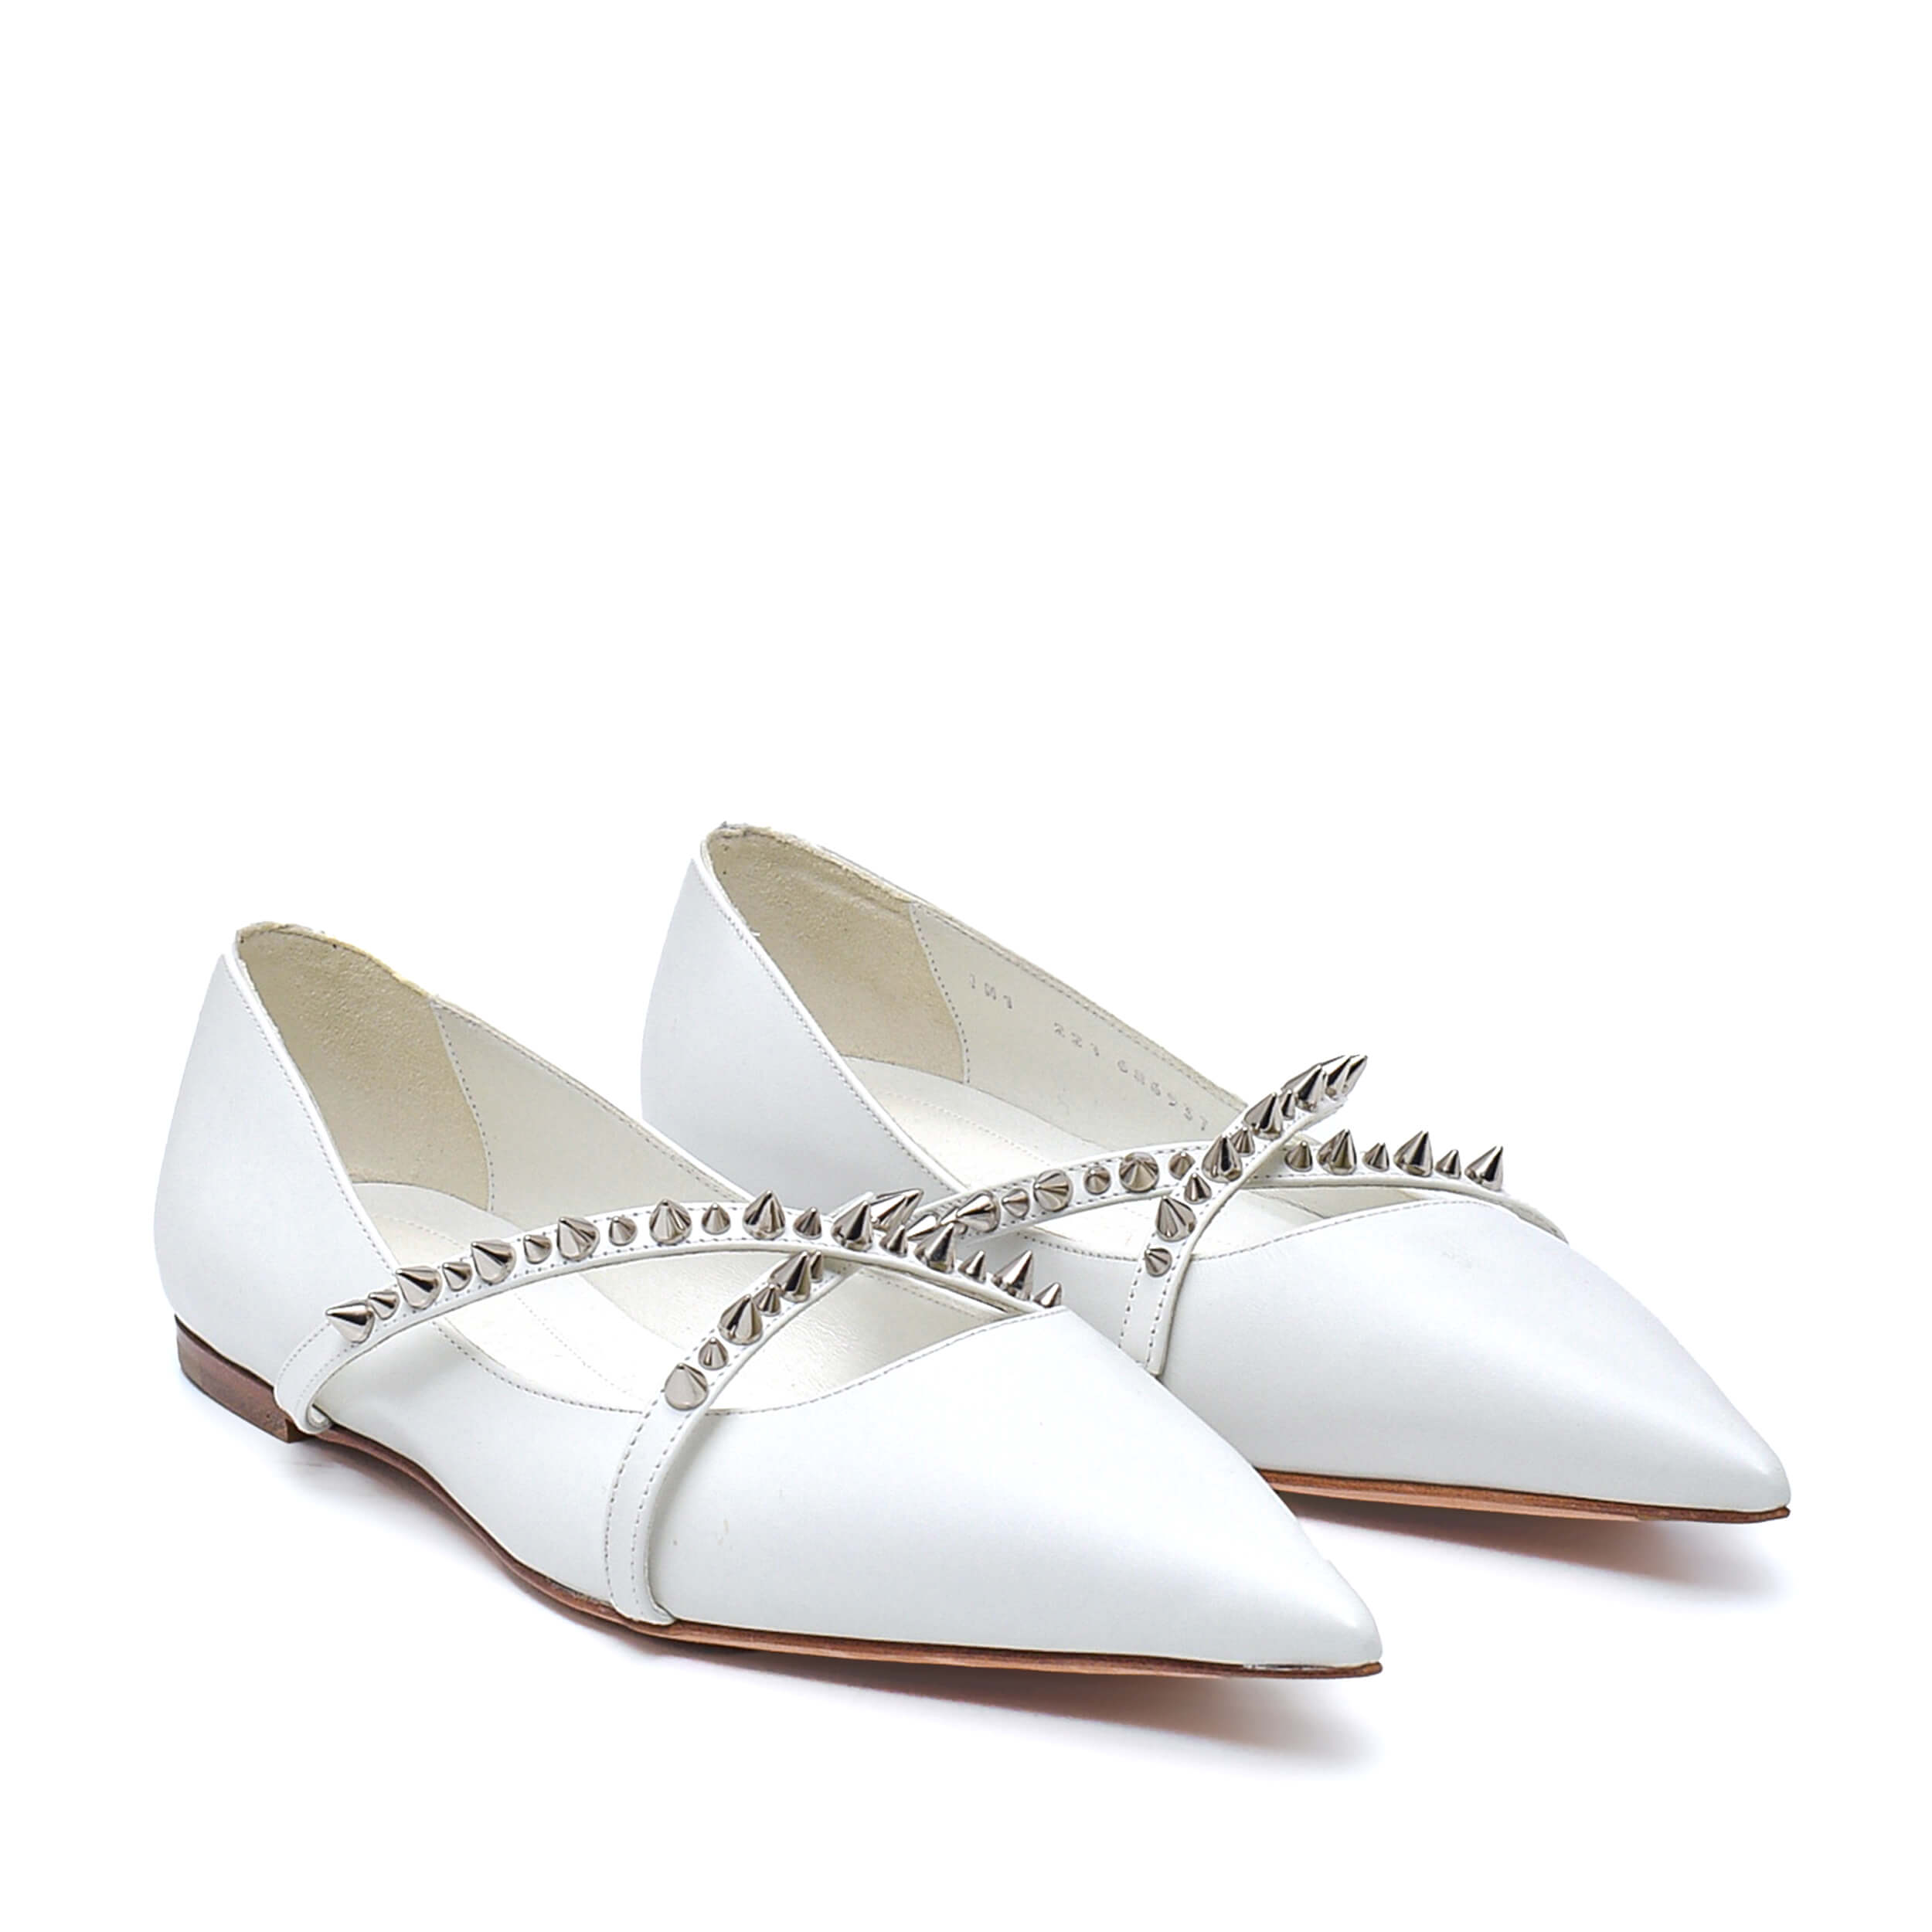 Alexander McQueen - White Leather Crystal Striped Flats / 38